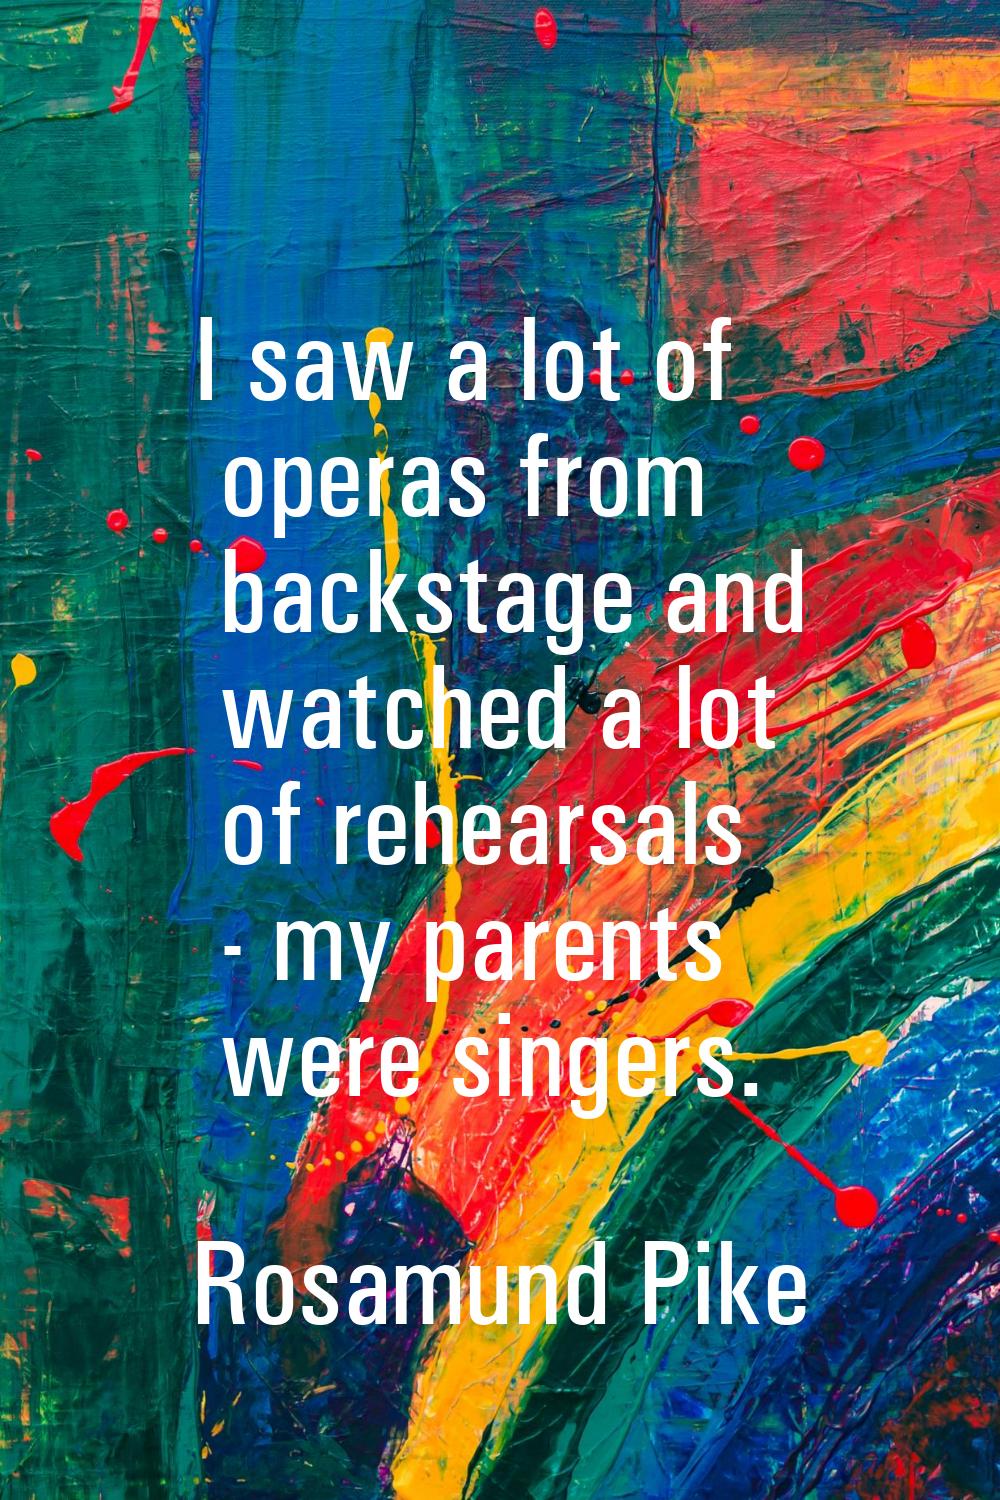 I saw a lot of operas from backstage and watched a lot of rehearsals - my parents were singers.